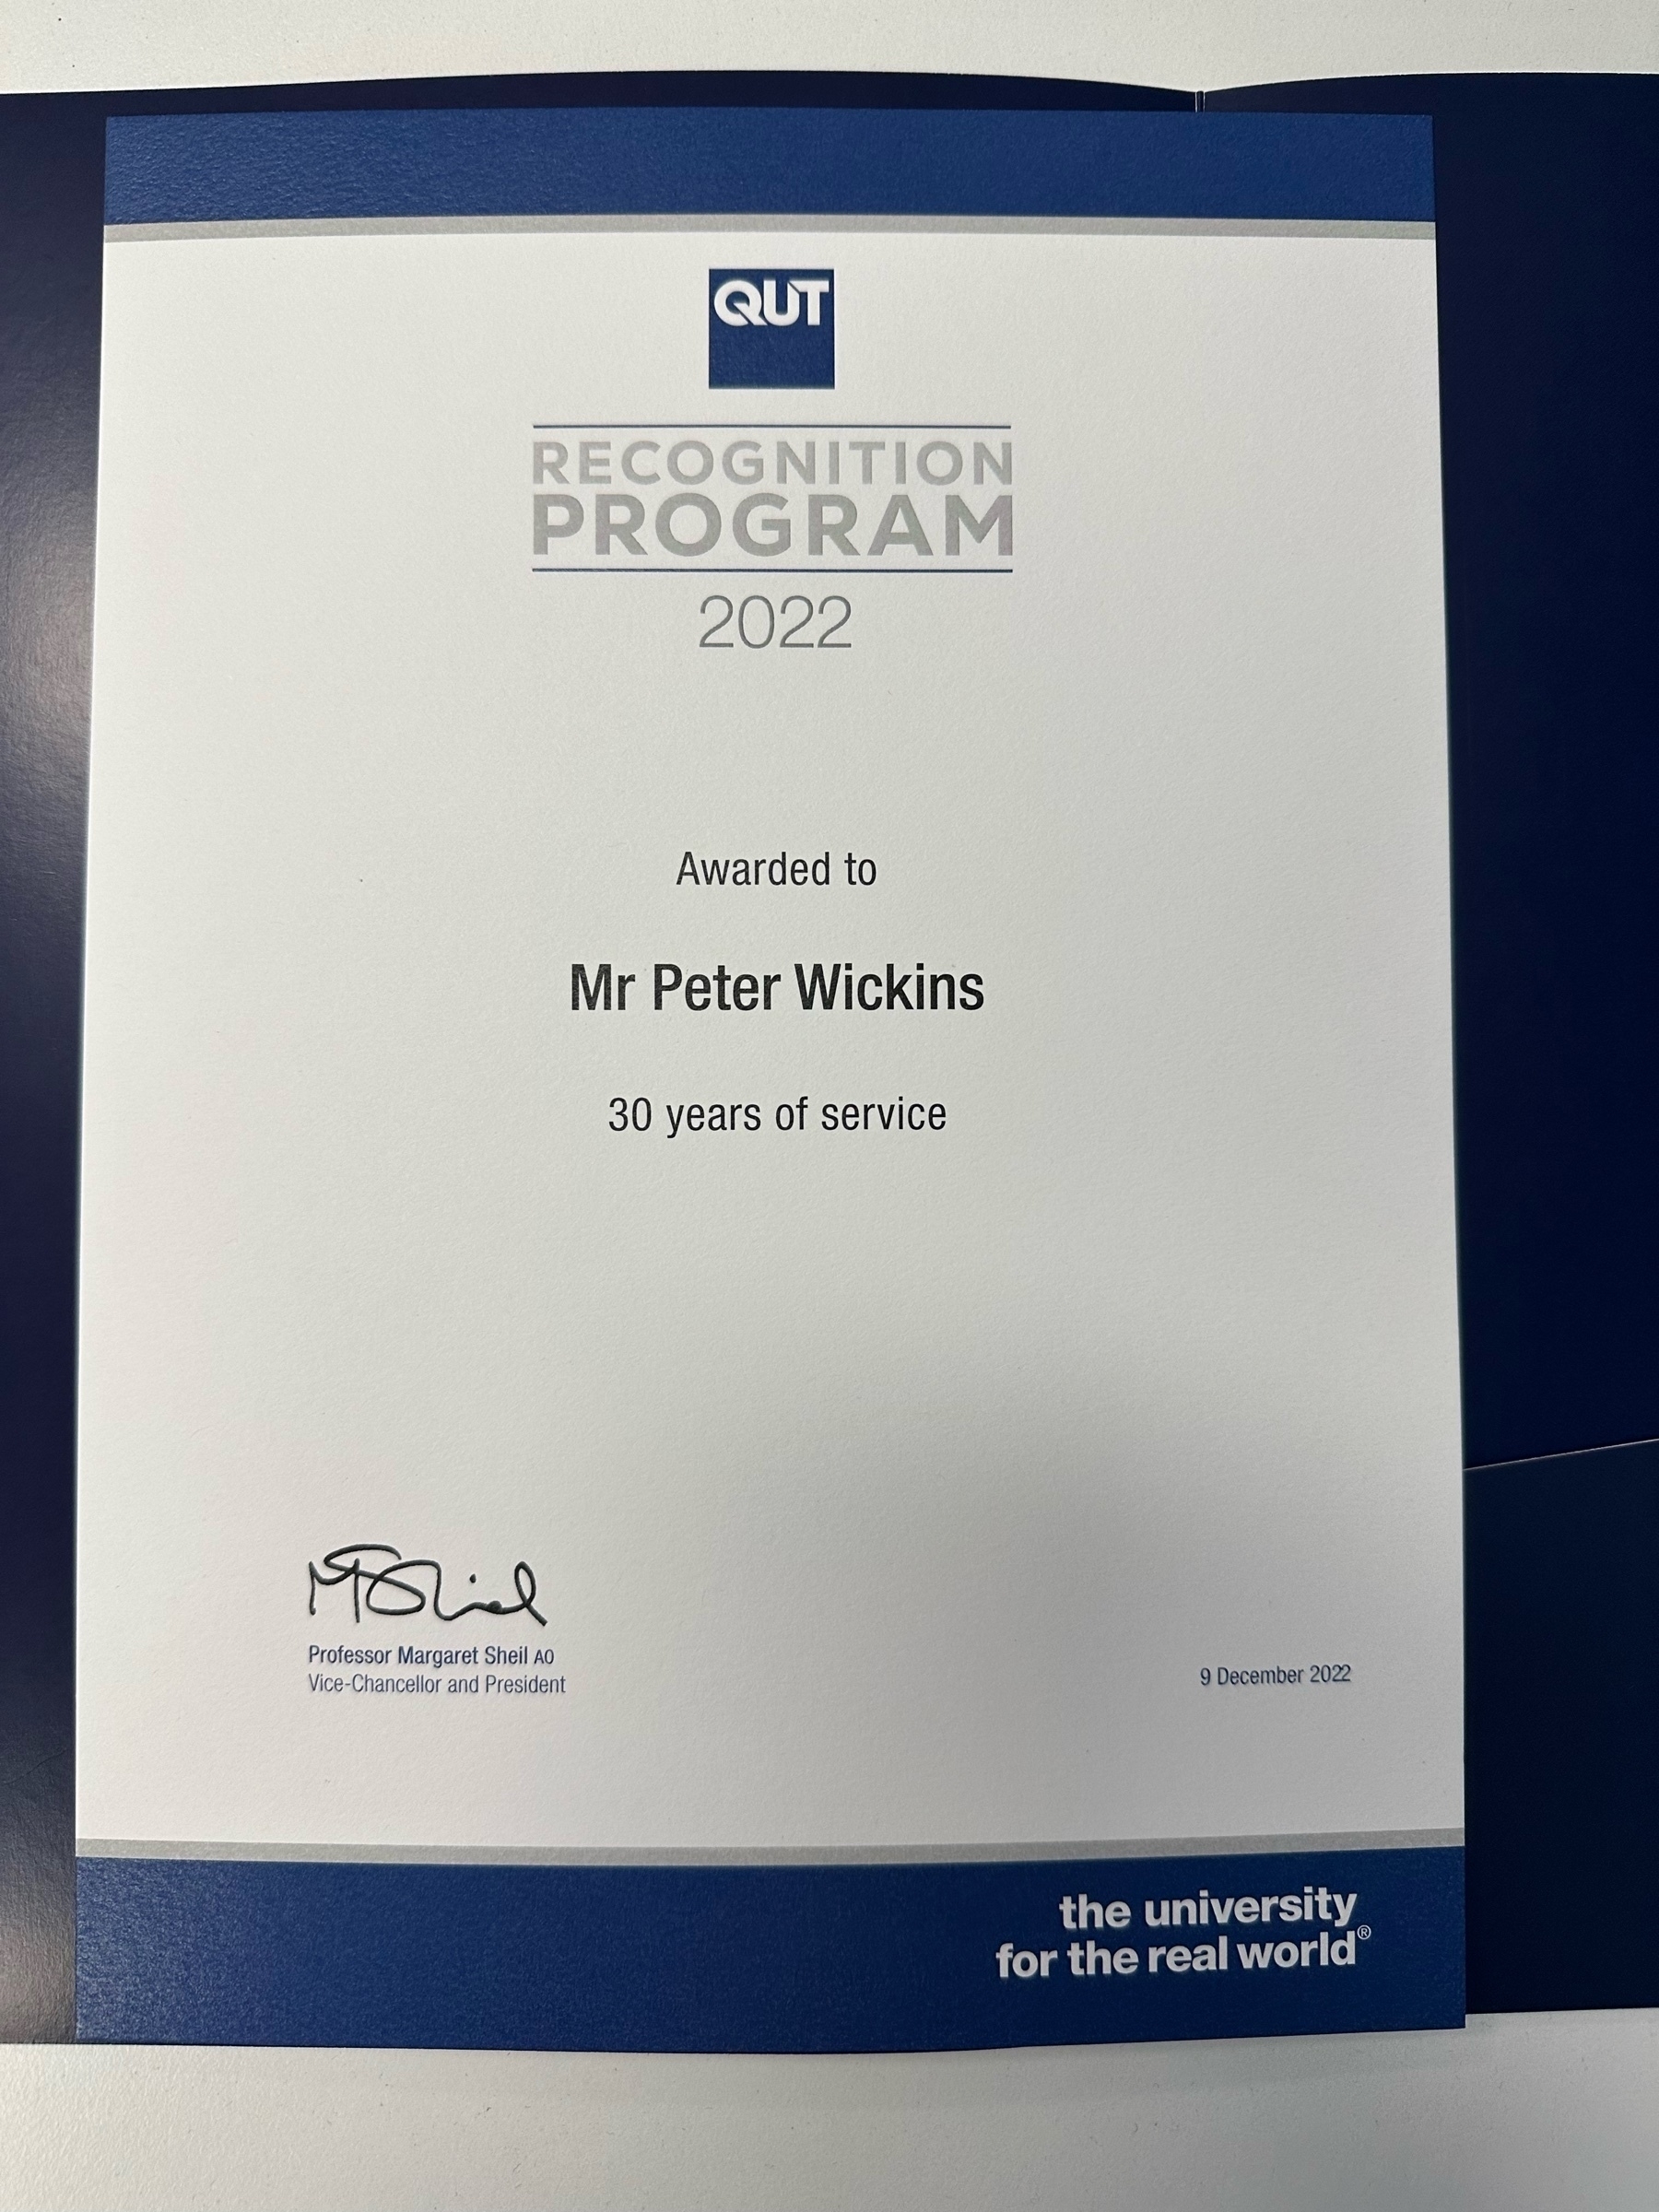 A white certificate bordered in blue. At the top is the word QUT inside a blue box with “Recognition Program 2022” underneath. In the middle is “Awarded to Mr Peter (surname is blocked out) for 30 years of service”. Bottom left has the name and signature of the Vice-Chancellor. Bottom right is 9 December 2022.